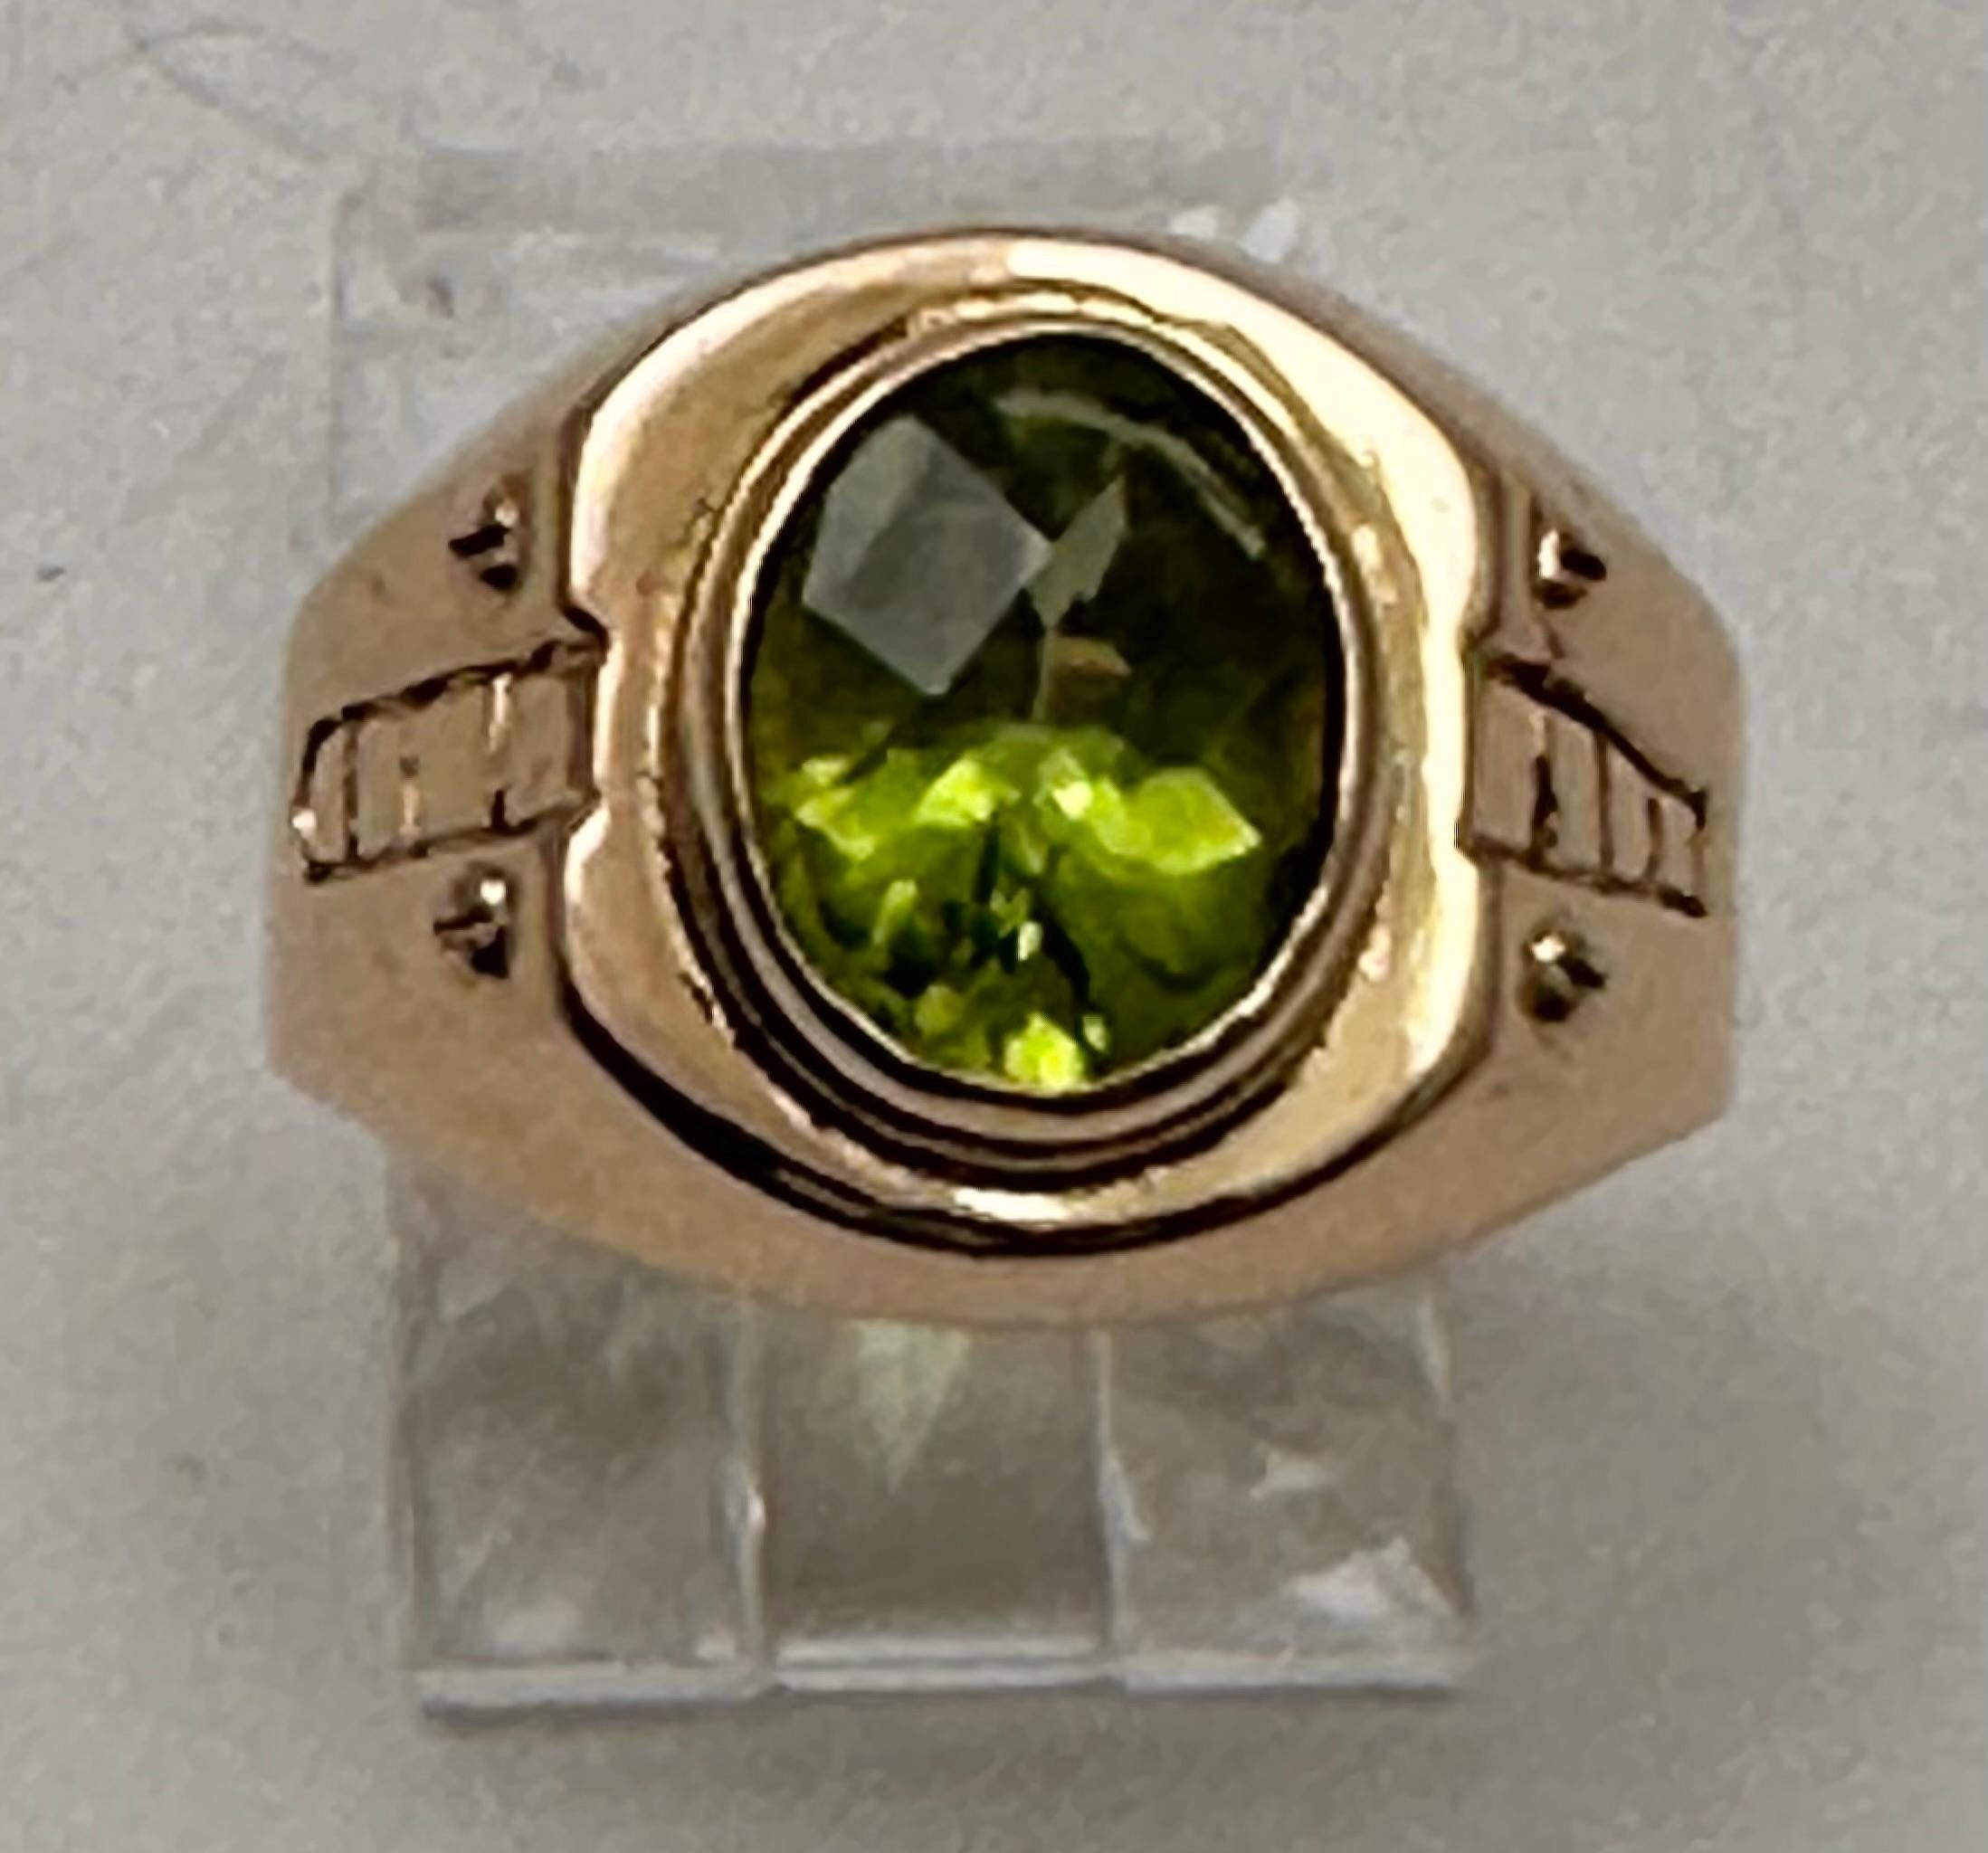 For sale is a beautiful handmade 21kt yellow gold ring with an oval peridot stone measuring 8mm x 9mm. The stone is a lovely green color and set securely in a bezel. The ring is size 5 3/4 and can be resized if needed. This fine jewelry piece is